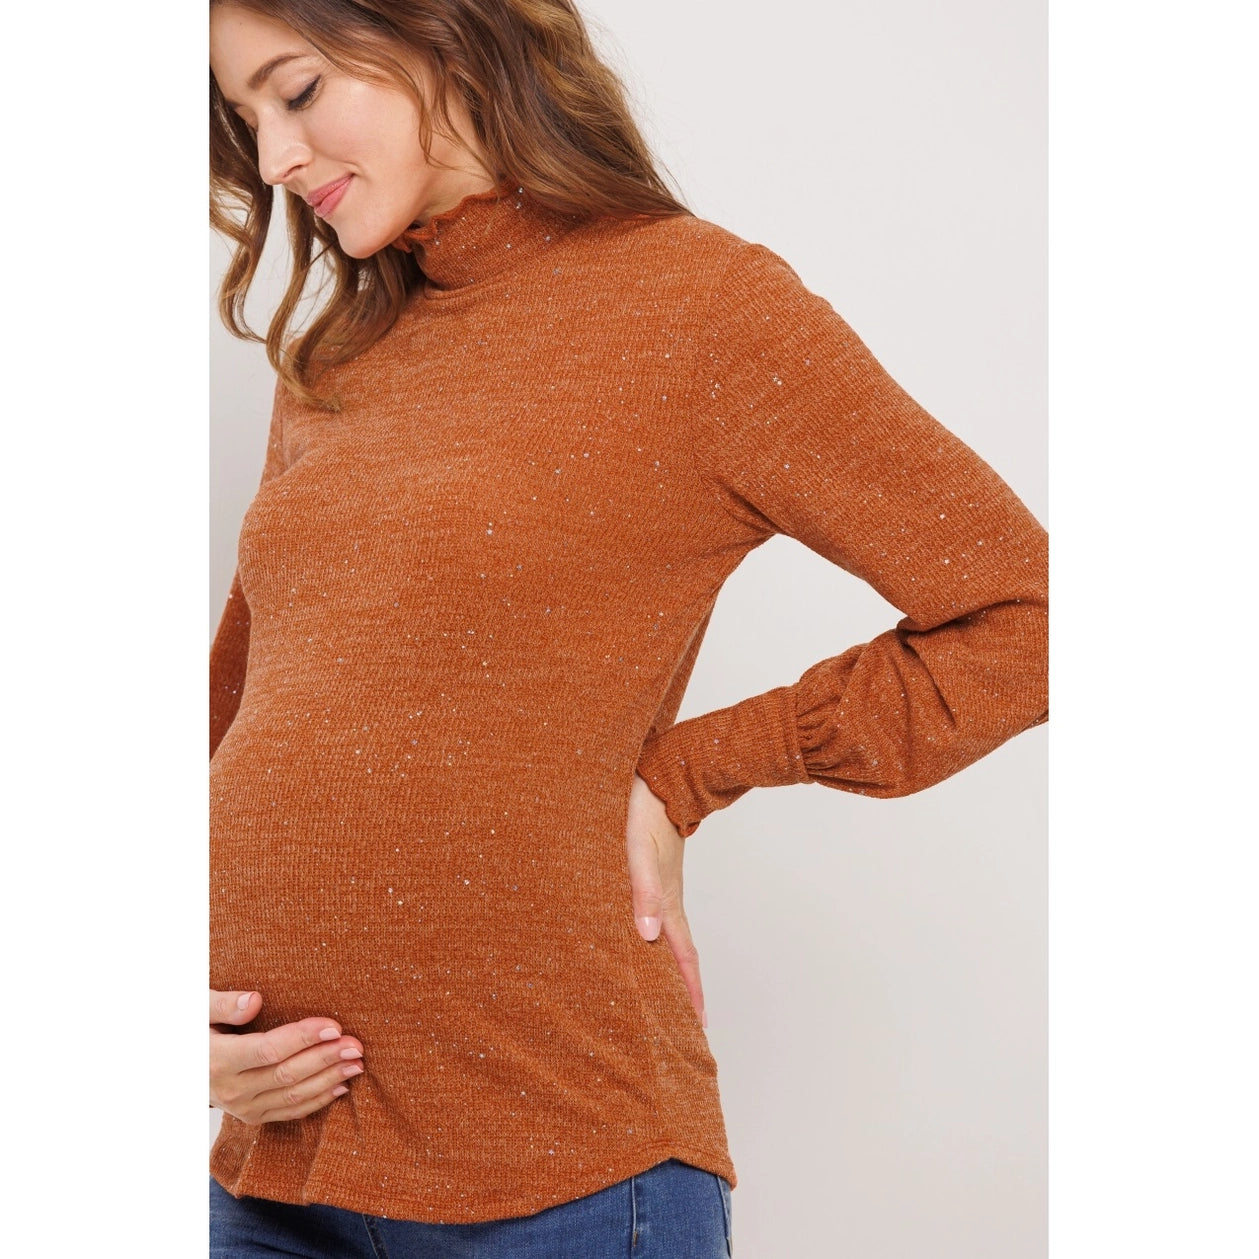 Sequined Evening Maternity Turtle Neck Blouse